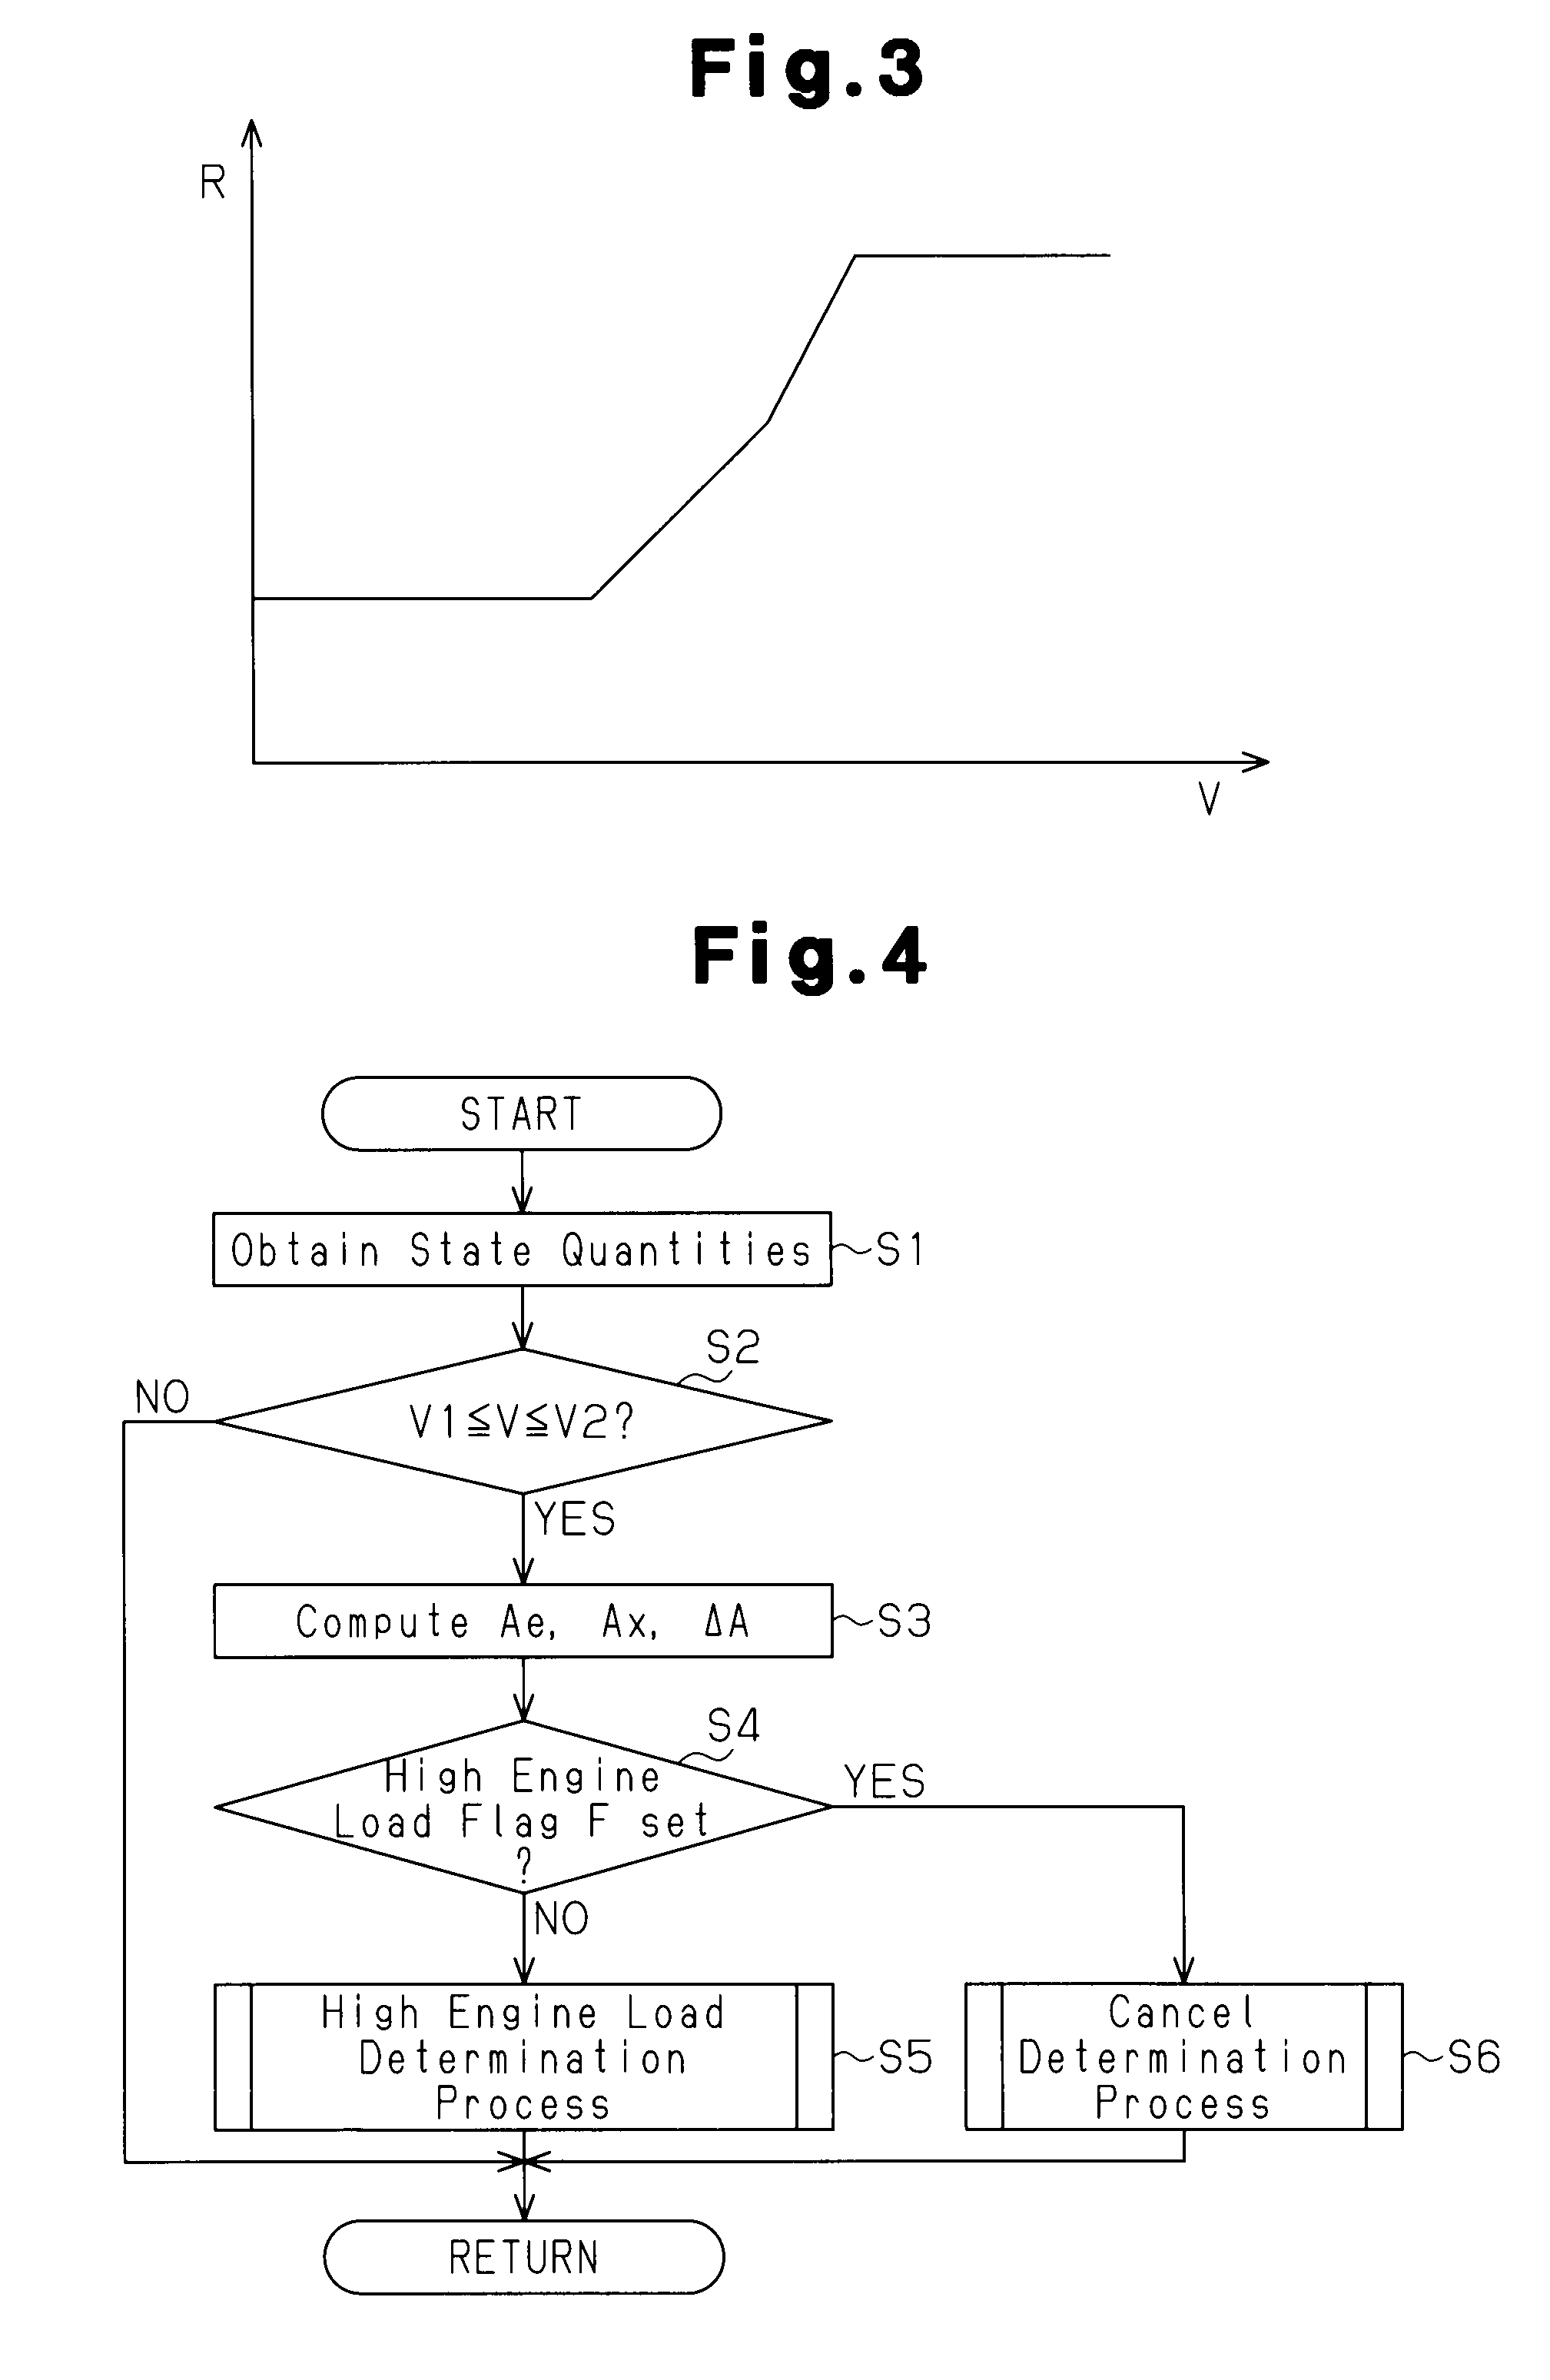 Driving power distribution apparatus and method for controlling torque coupling